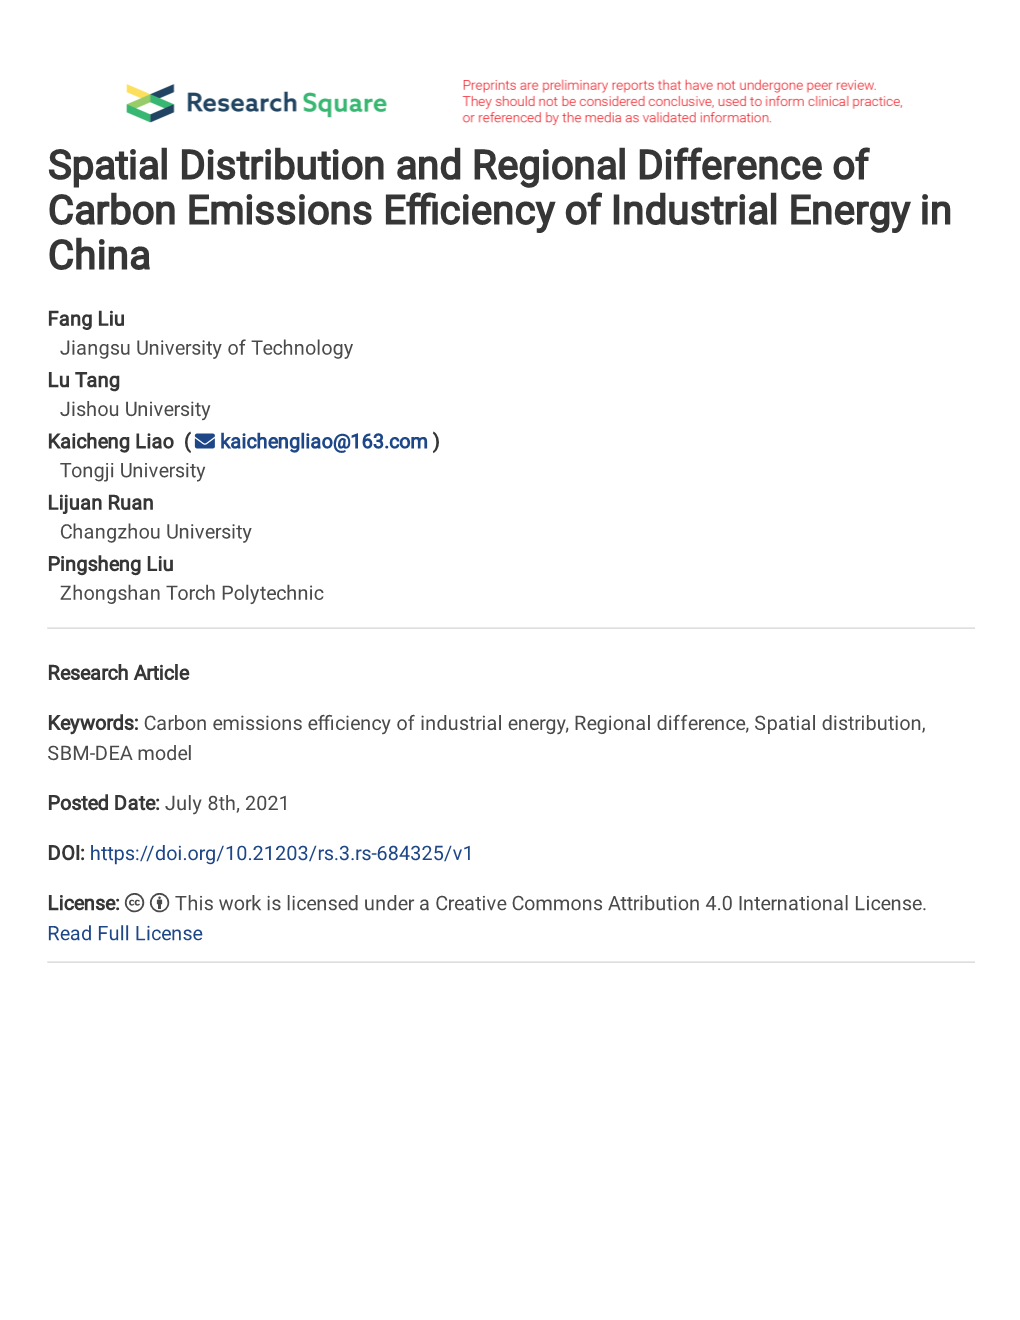 Spatial Distribution and Regional Difference of Carbon Emissions E�Ciency of Industrial Energy in China